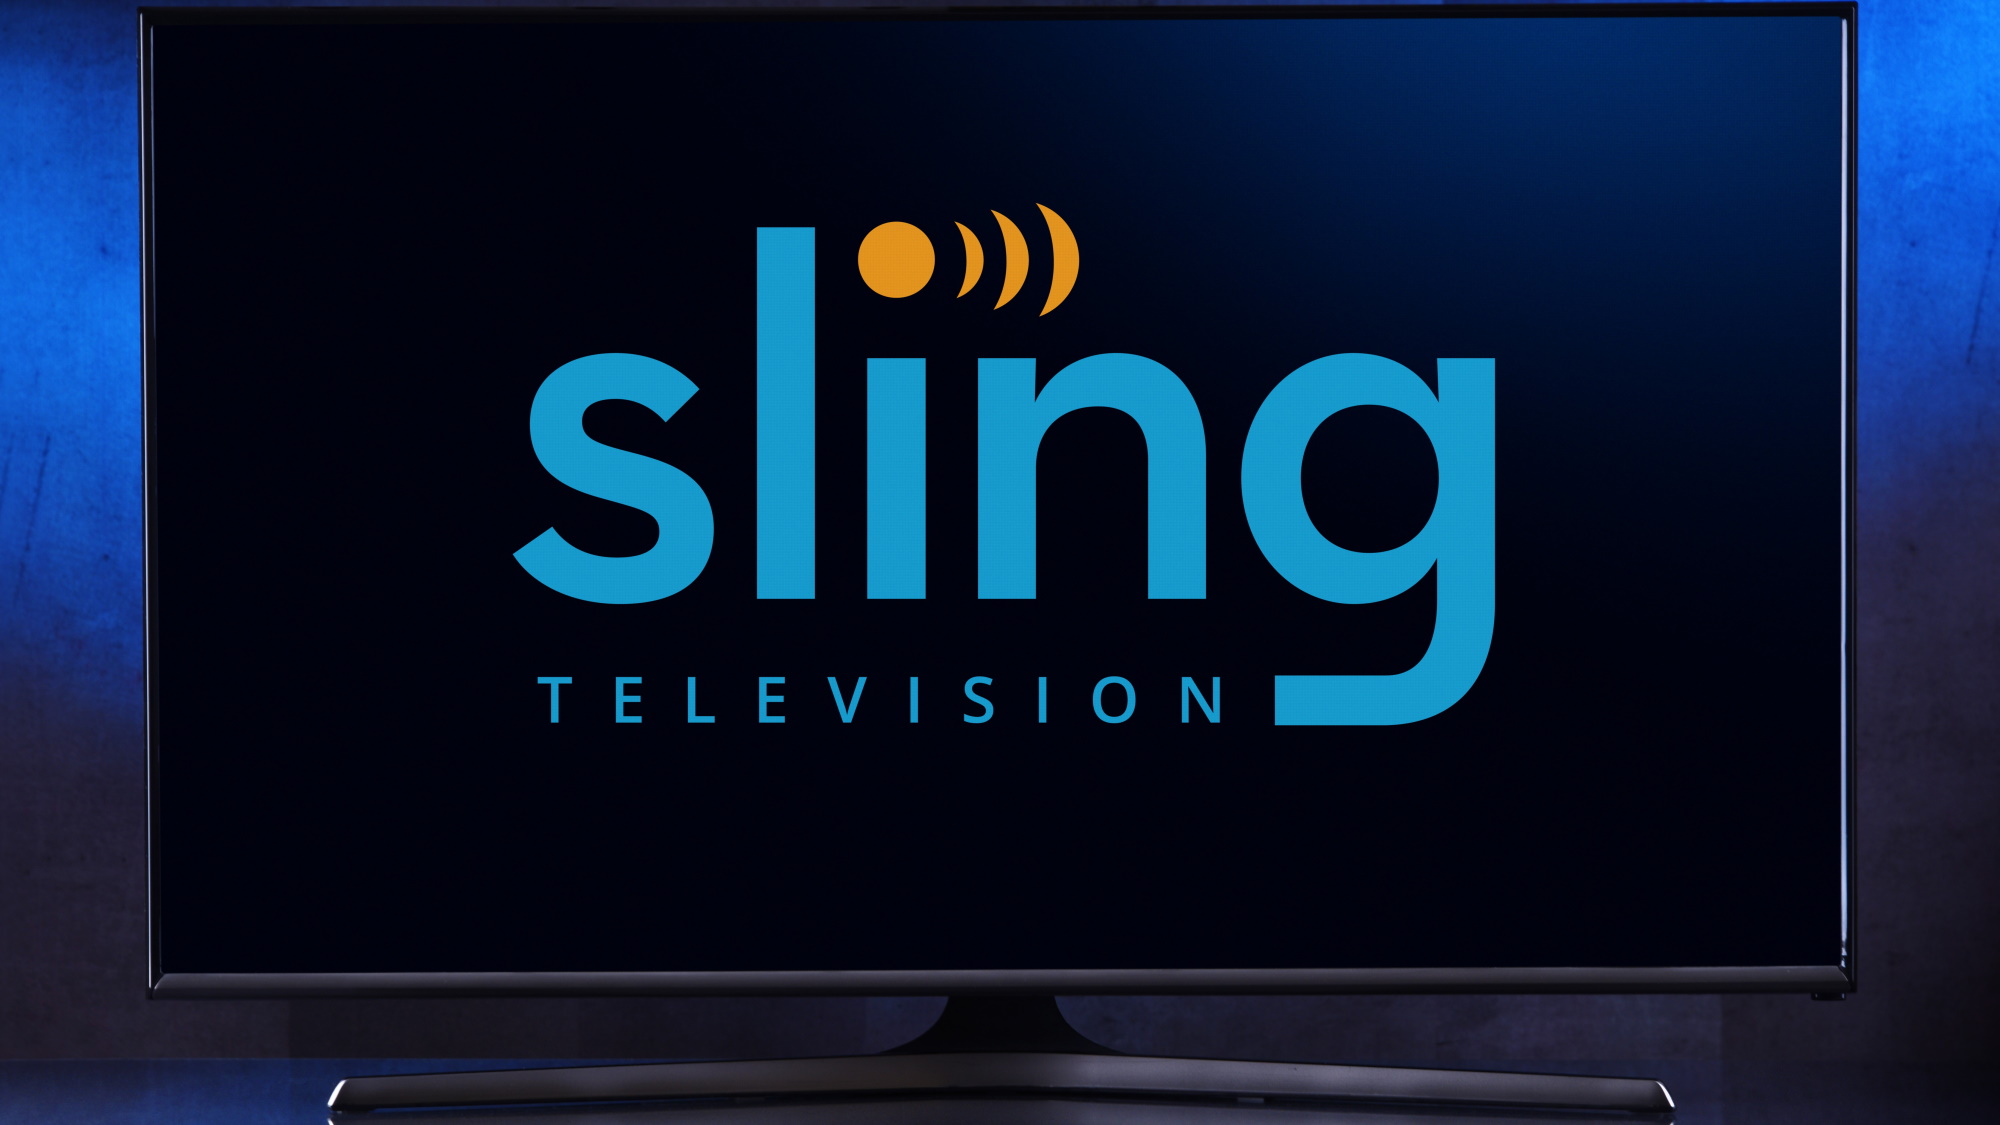 Sling Tv - Subscriptions How To Sign Up Live Tv Streaming And More Explained Techradar